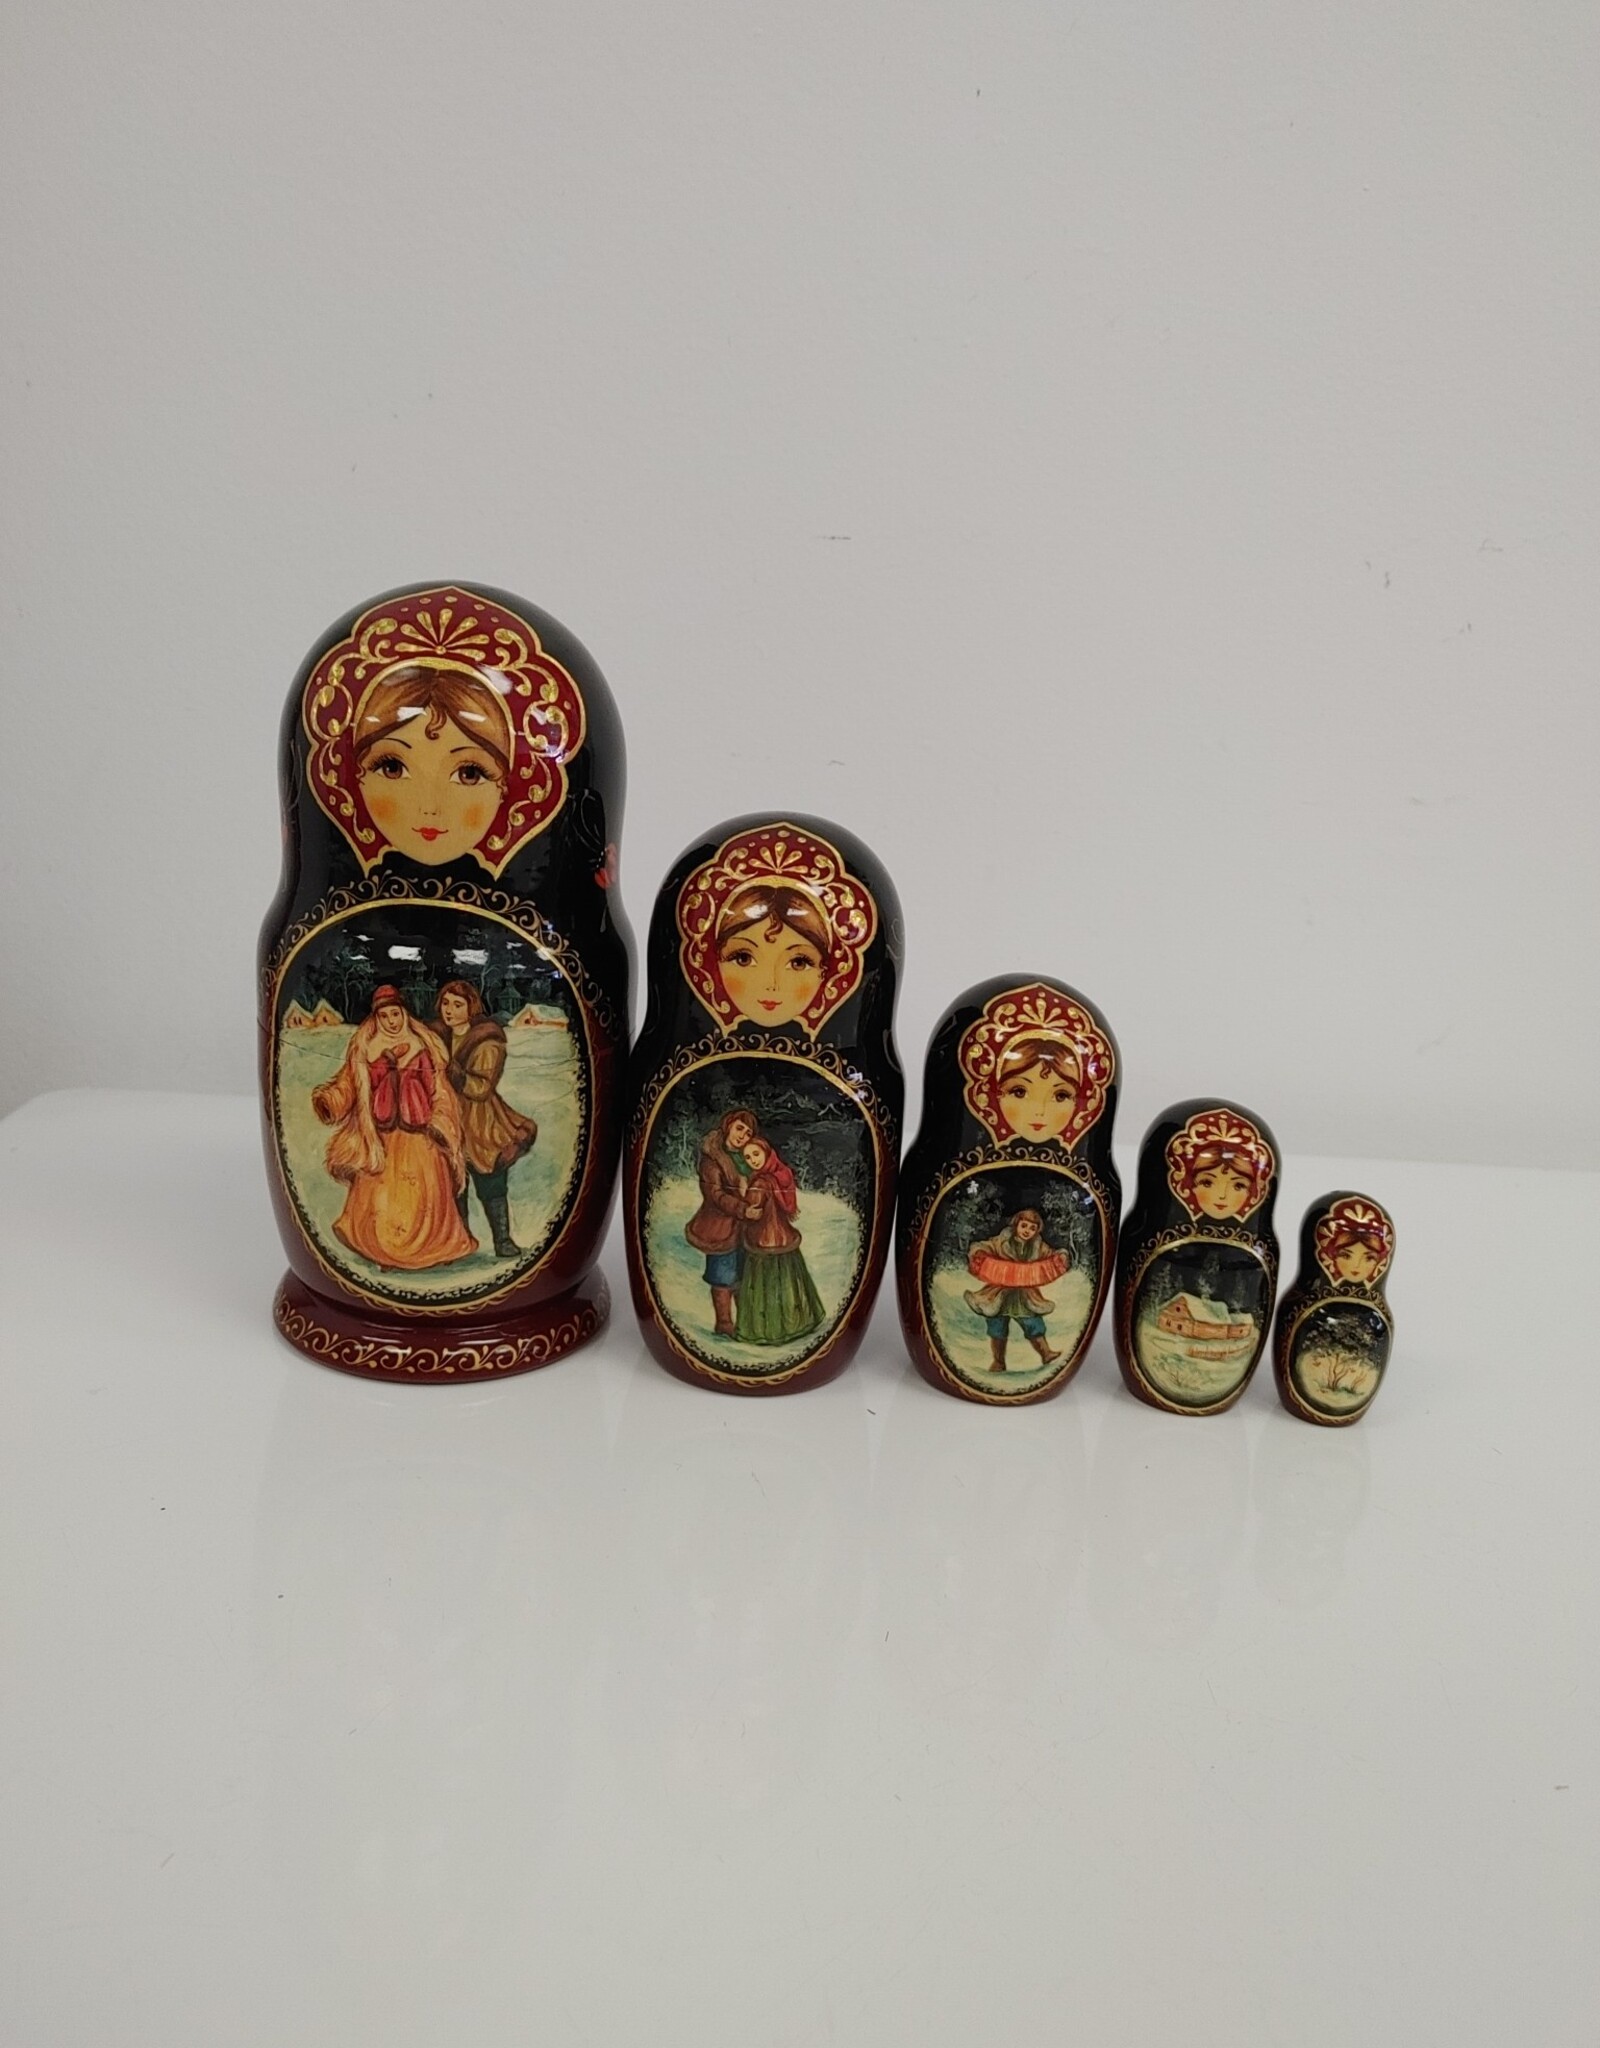 Vintage Hand-painted Russian Nesting Dolls 5 Piece - artist signed